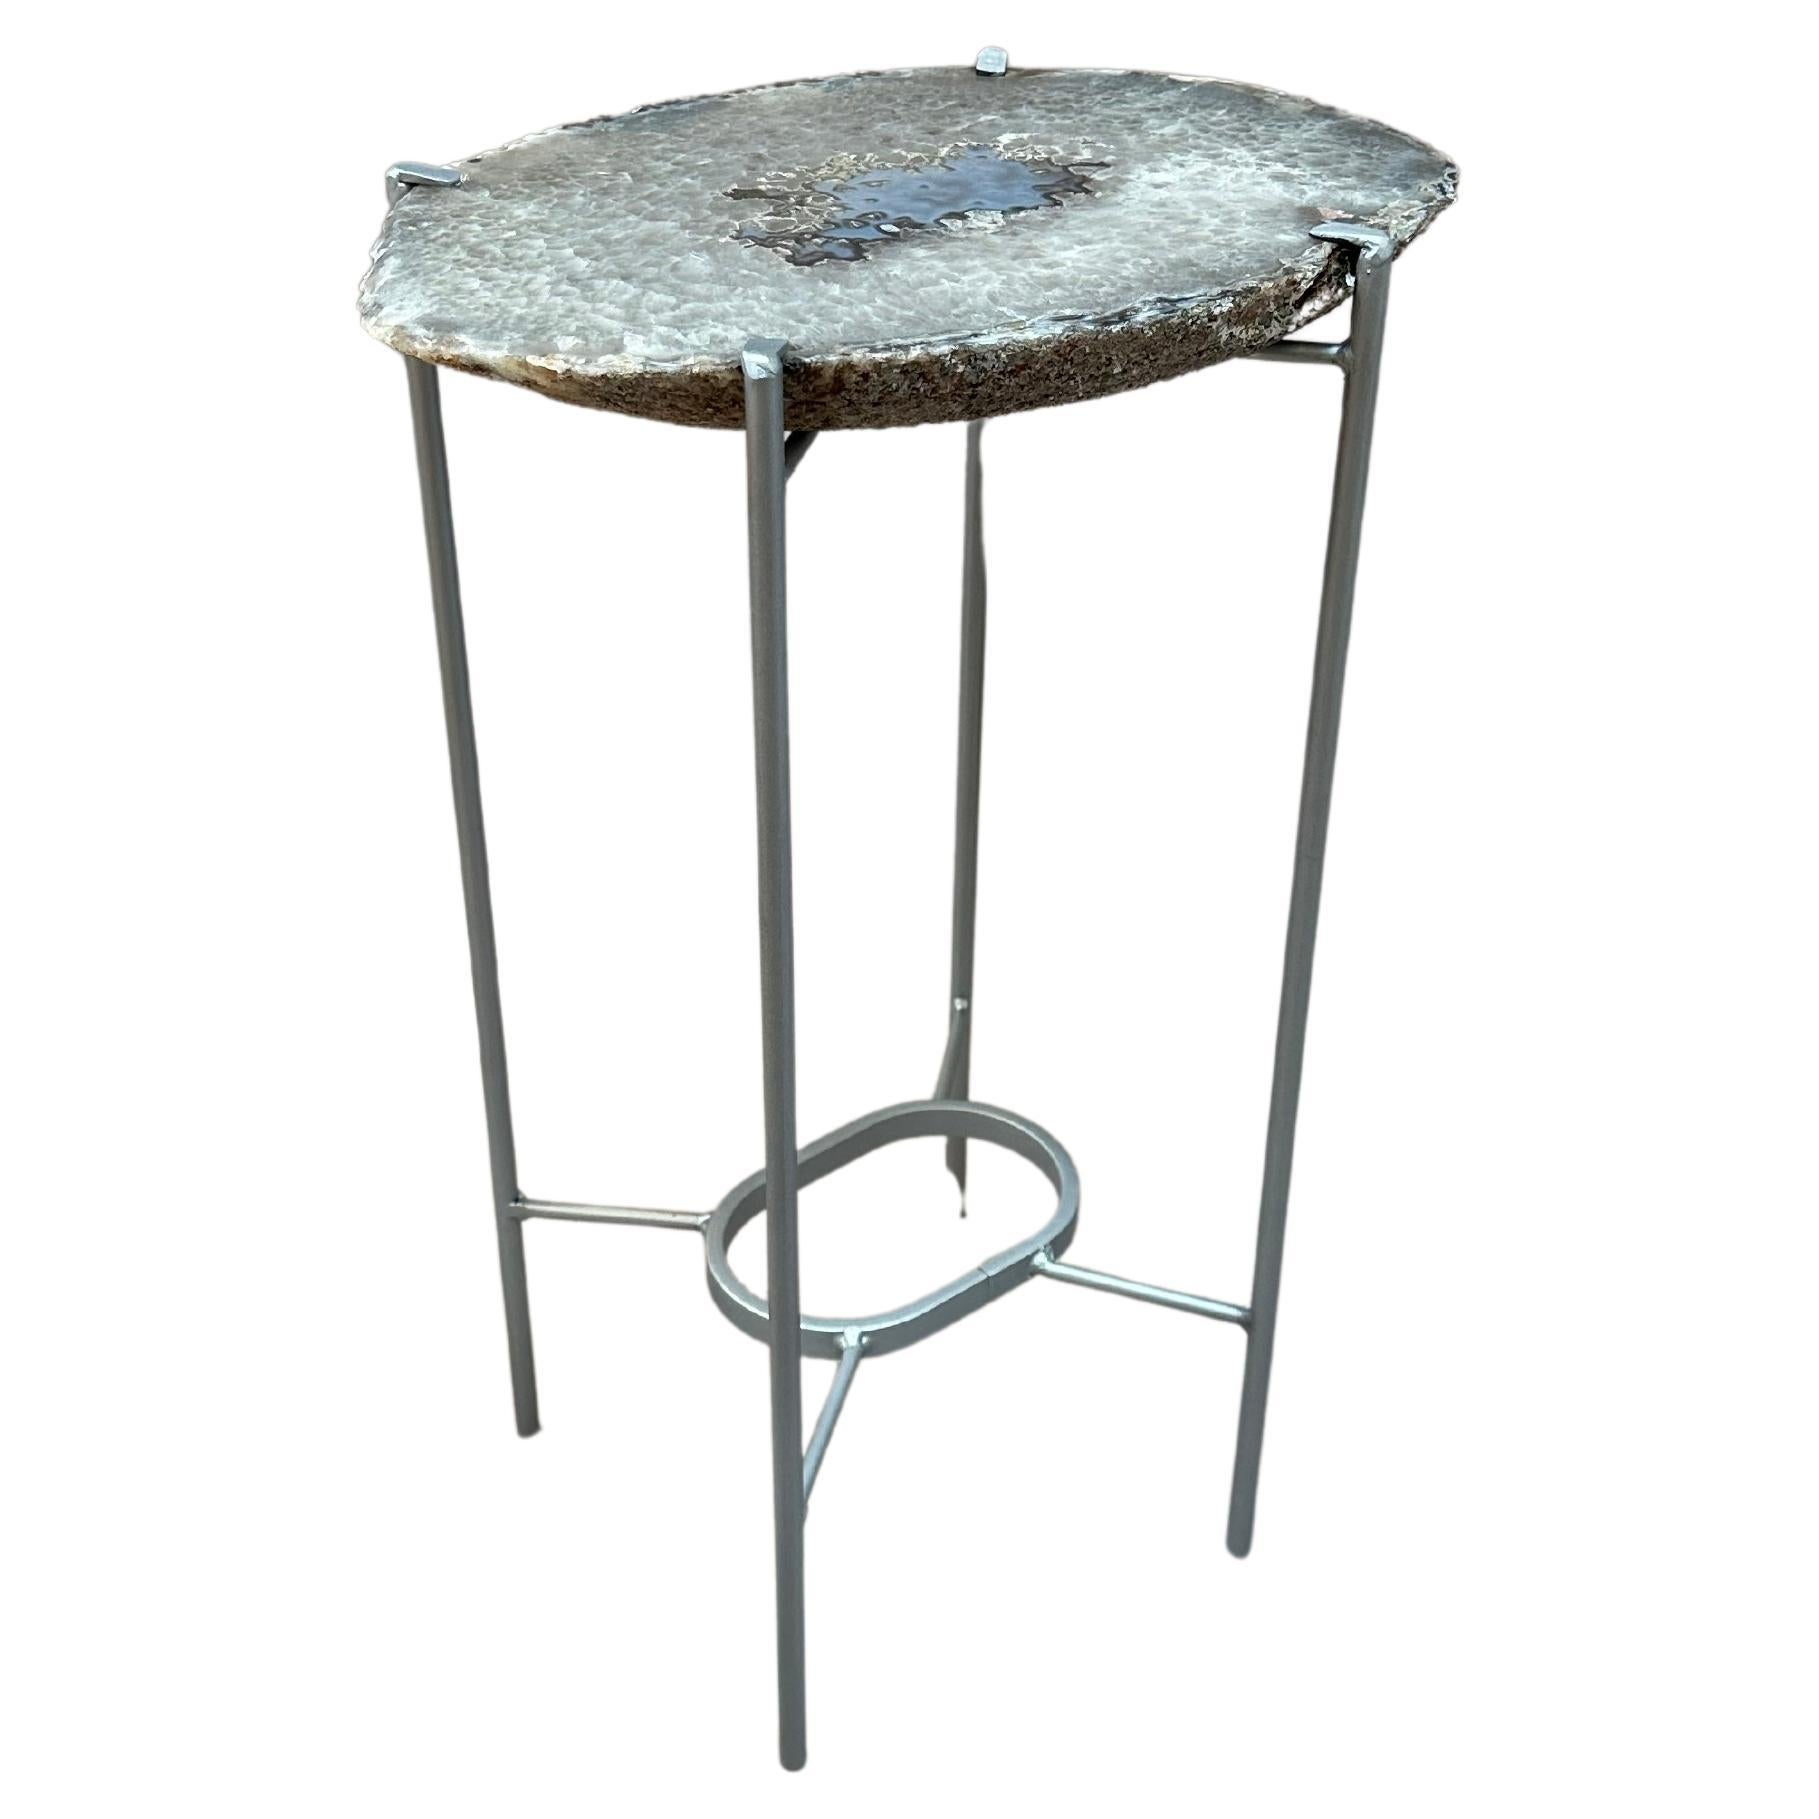 Unusual Modern Handcrafted Geode Drinks Table For Sale